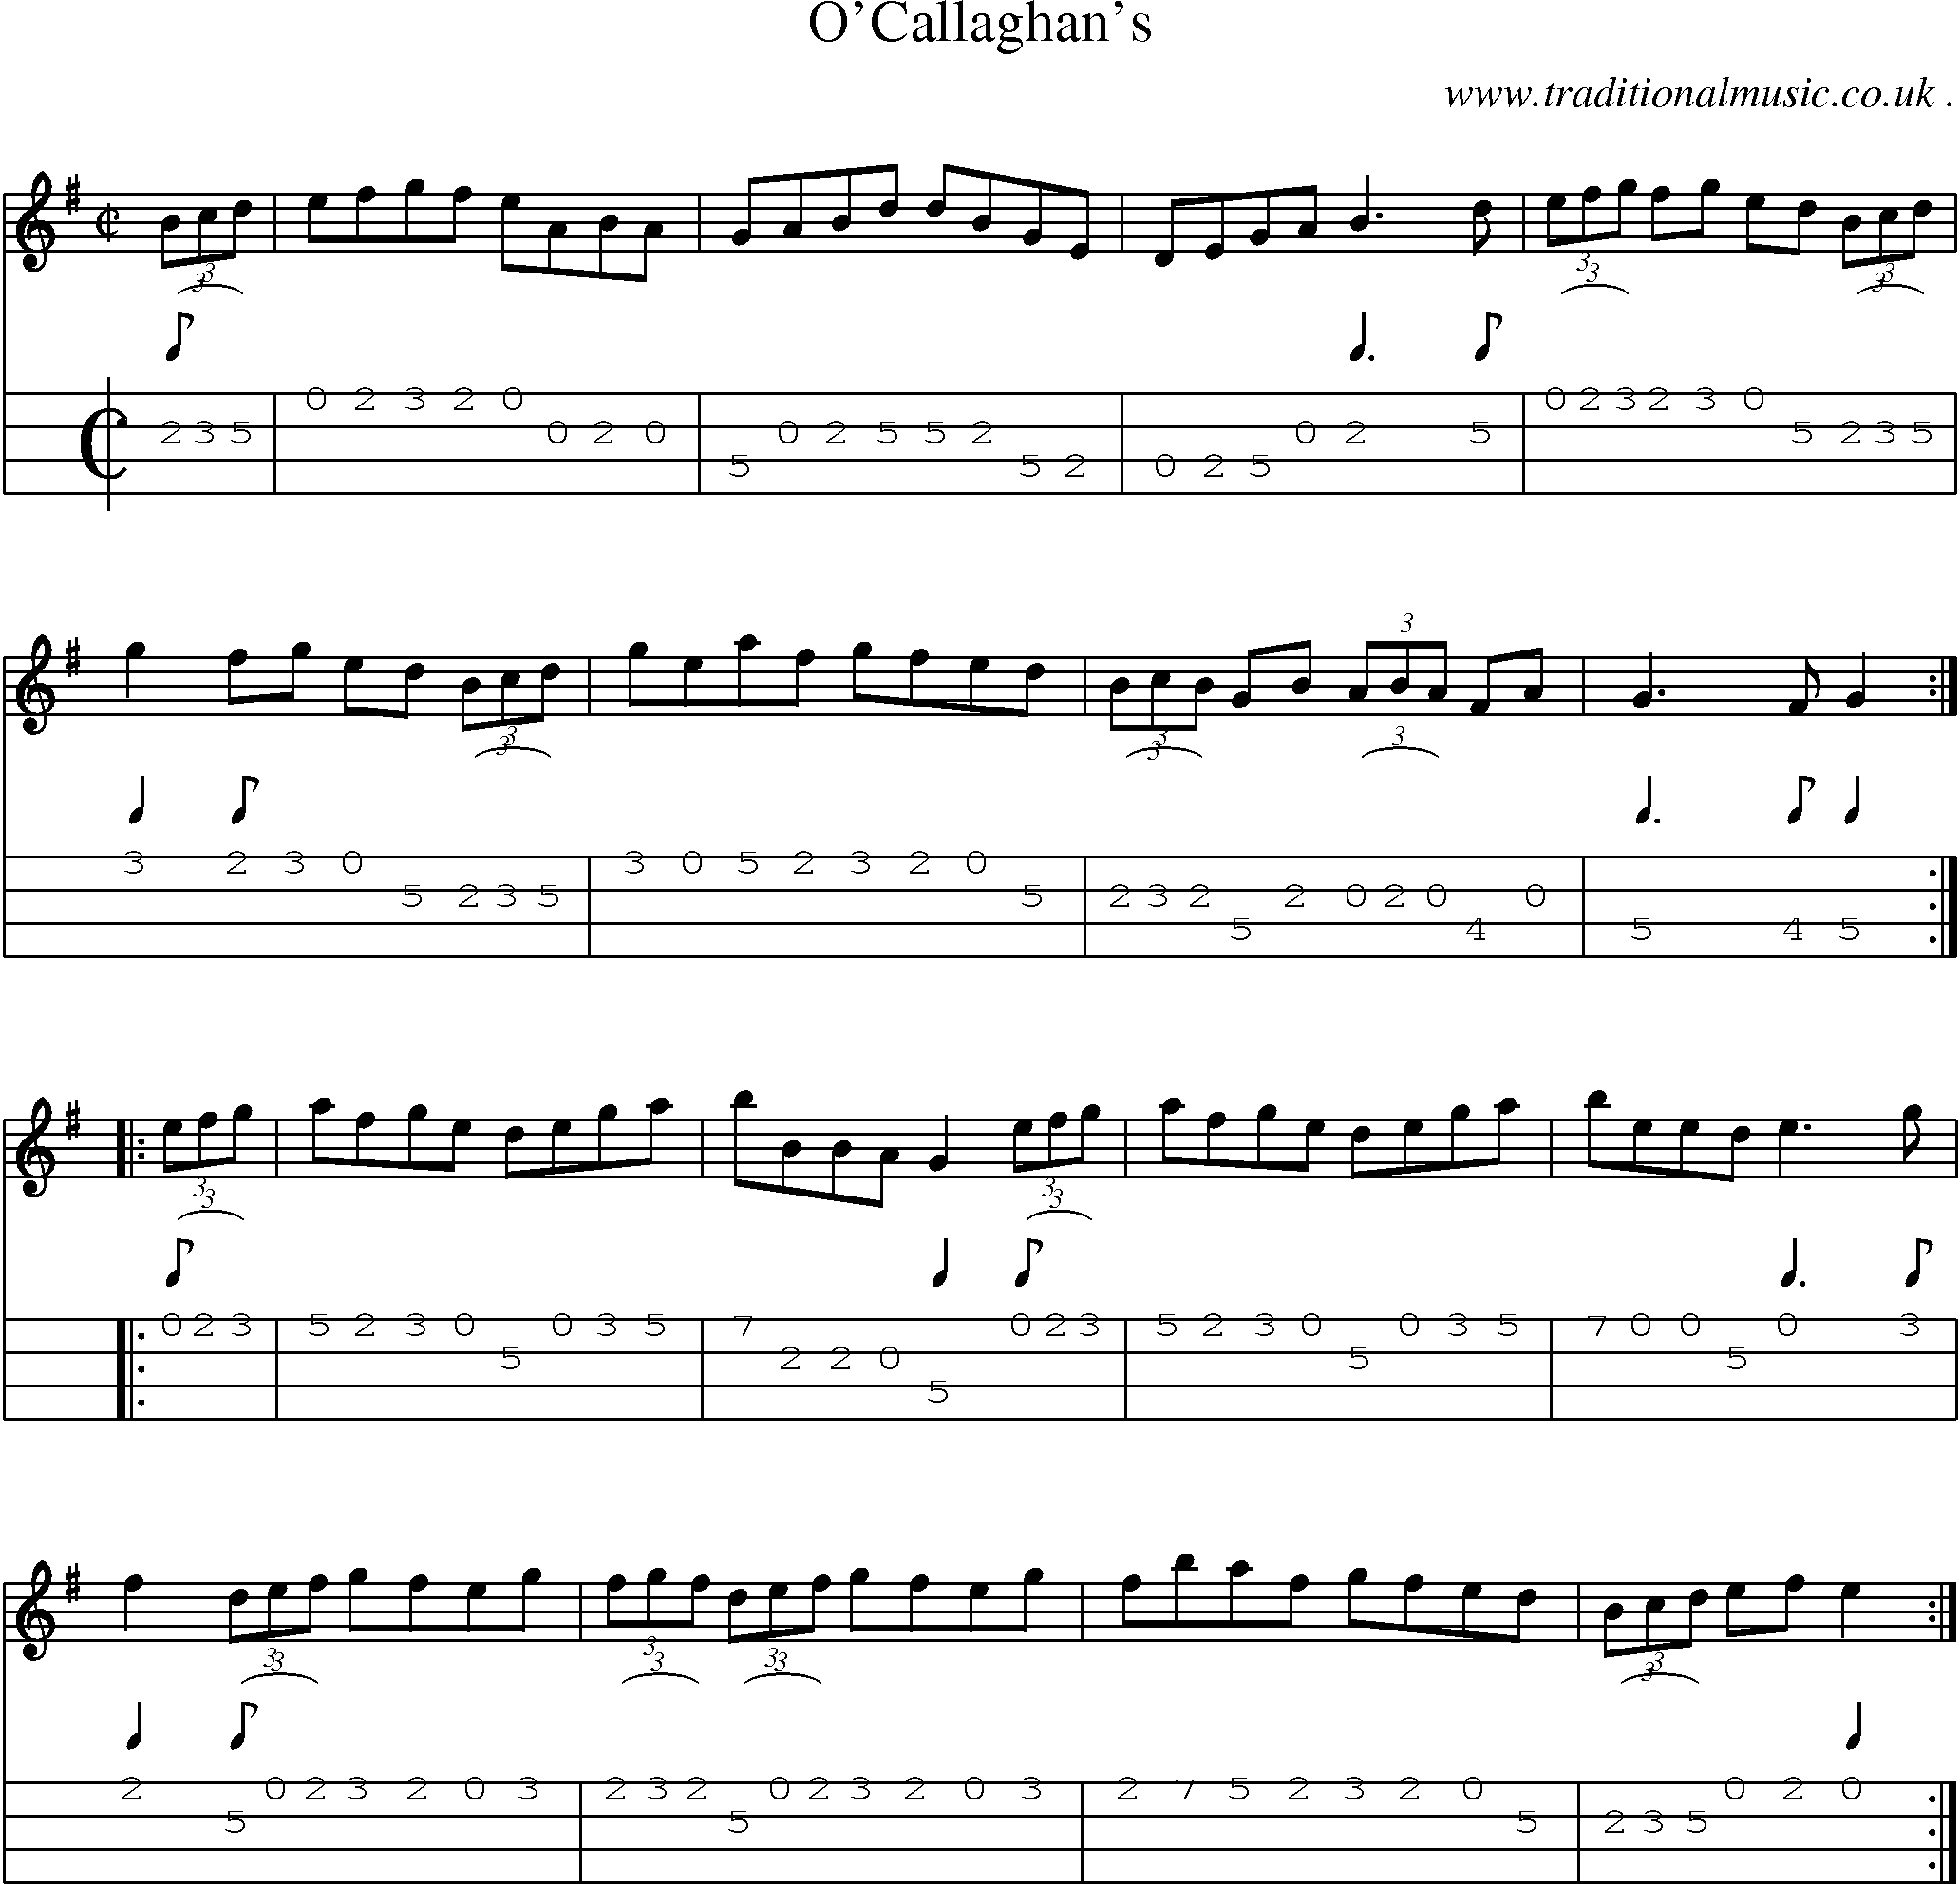 Sheet-Music and Mandolin Tabs for Ocallaghans